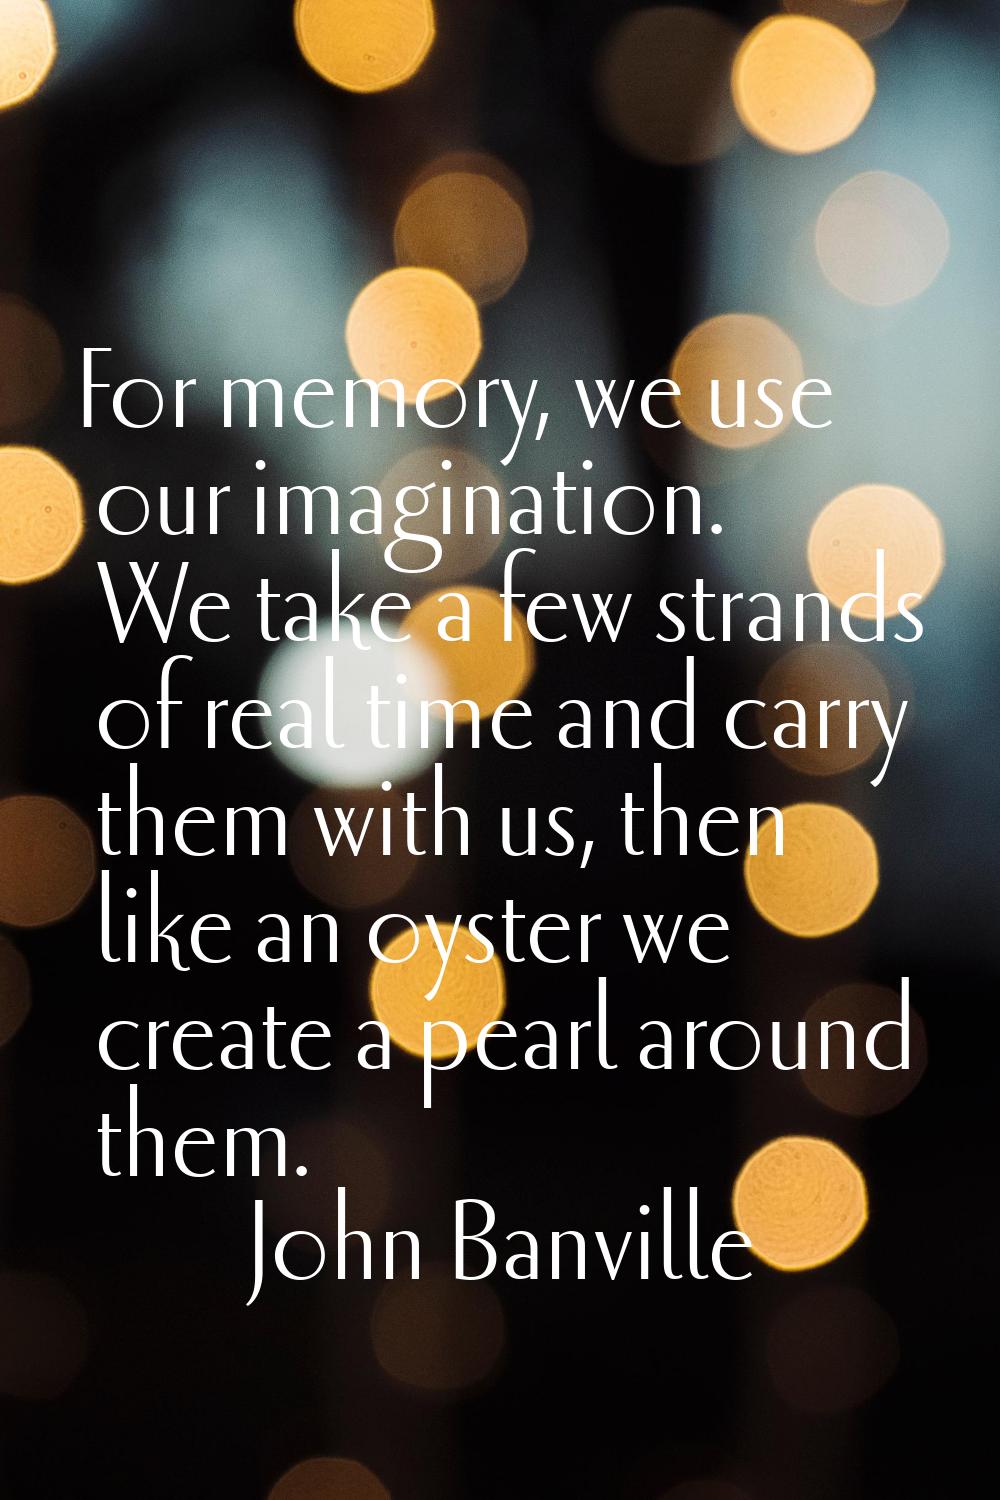 For memory, we use our imagination. We take a few strands of real time and carry them with us, then